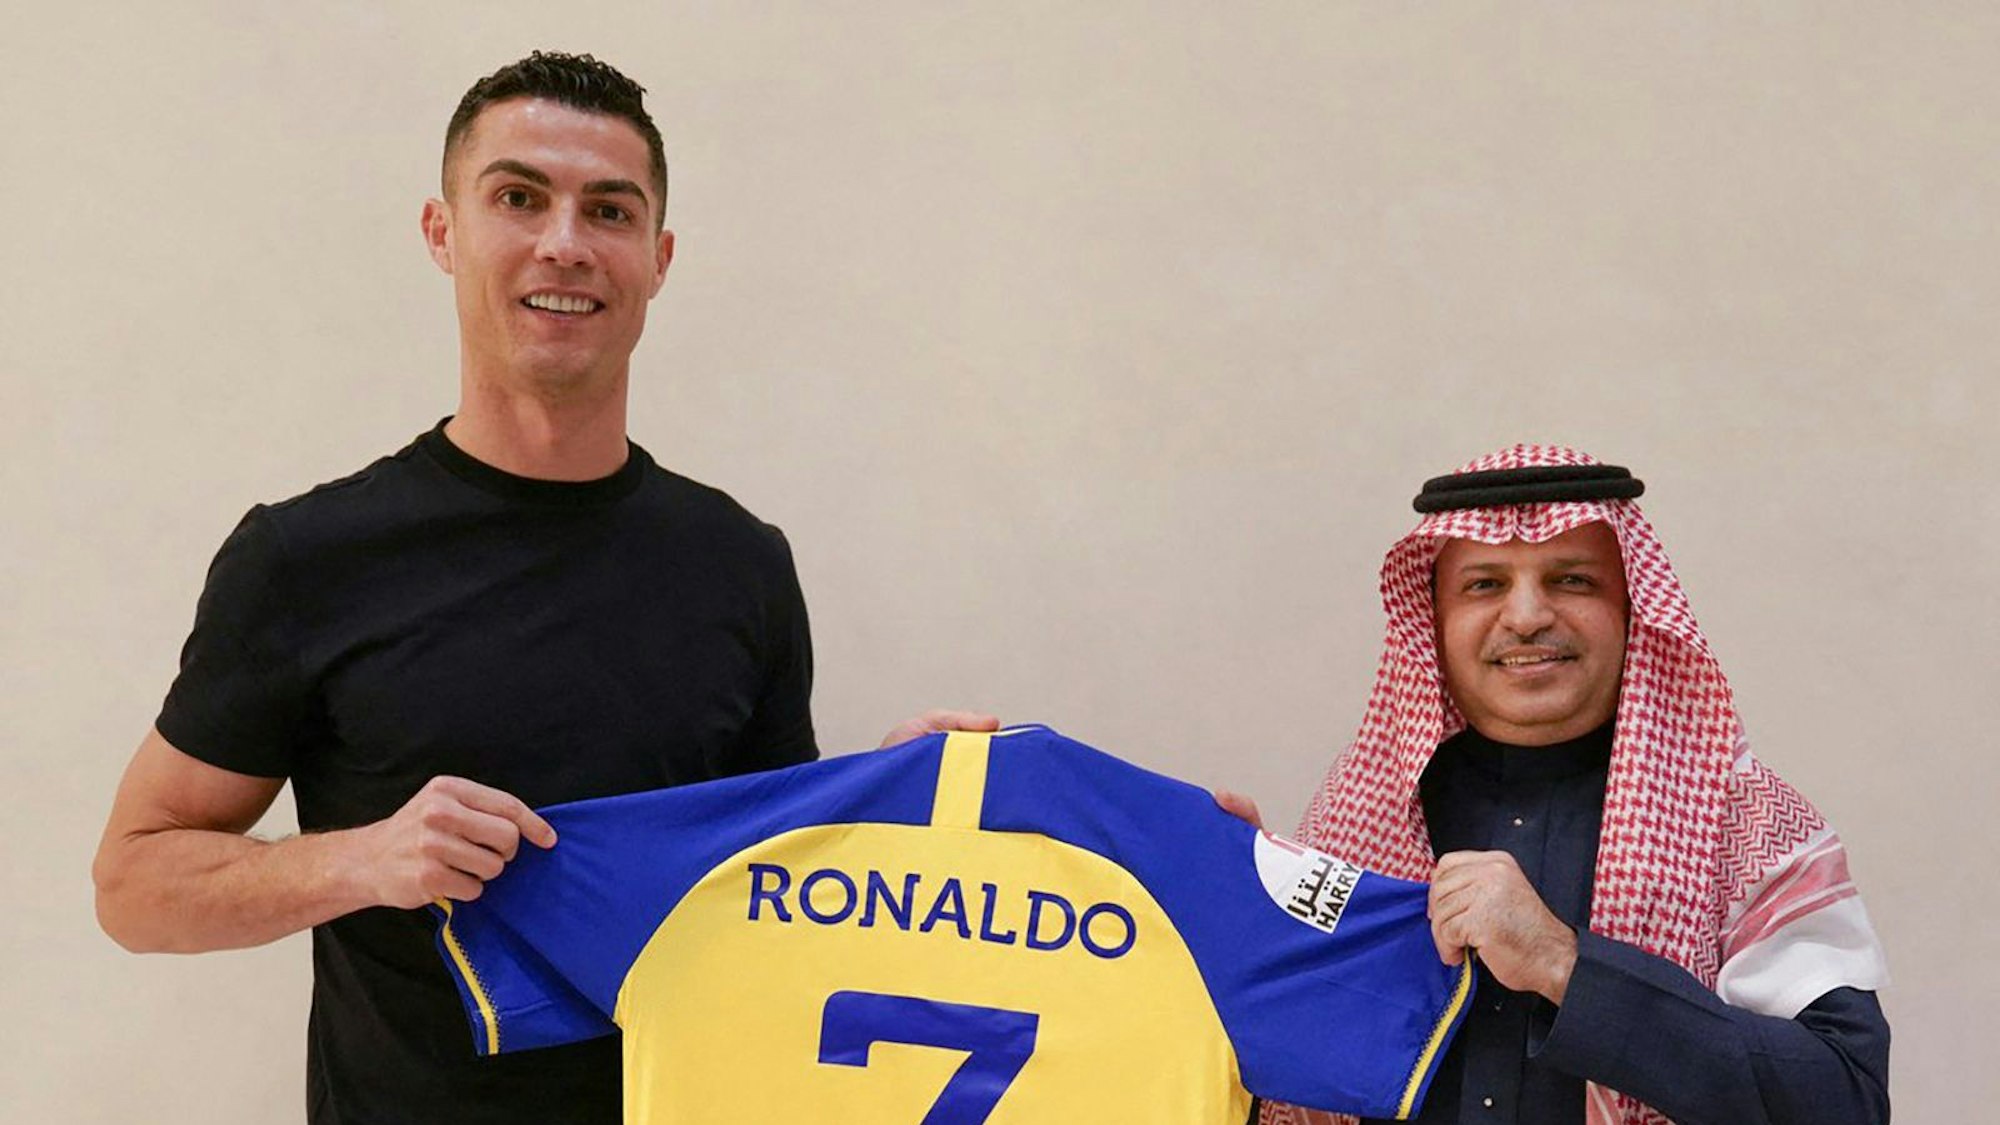 A handout picture released by Saudi Arabia's Al Nassr football club on their Twitter account shows Portugal's forward Cristiano Ronaldo being presented with the club's number seven jersey by club president Musalli Al-Muammar in Madrid on December 30, 2022 upon signing for the Saudi Arabian club. - Ronaldo signed for Al Nassr of Saudi Arabia, the club announced, in a deal believed to be worth more than 200 million euros. The 37-year-old penned a contract which will take him to June 2025. (Photo by Al Nassr Football Club / AFP) / == RESTRICTED TO EDITORIAL USE - MANDATORY CREDIT "AFP PHOTO / HO /AL NASSR FOOTBALL CLUB" - NO MARKETING NO ADVERTISING CAMPAIGNS - DISTRIBUTED AS A SERVICE TO CLIENTS ==